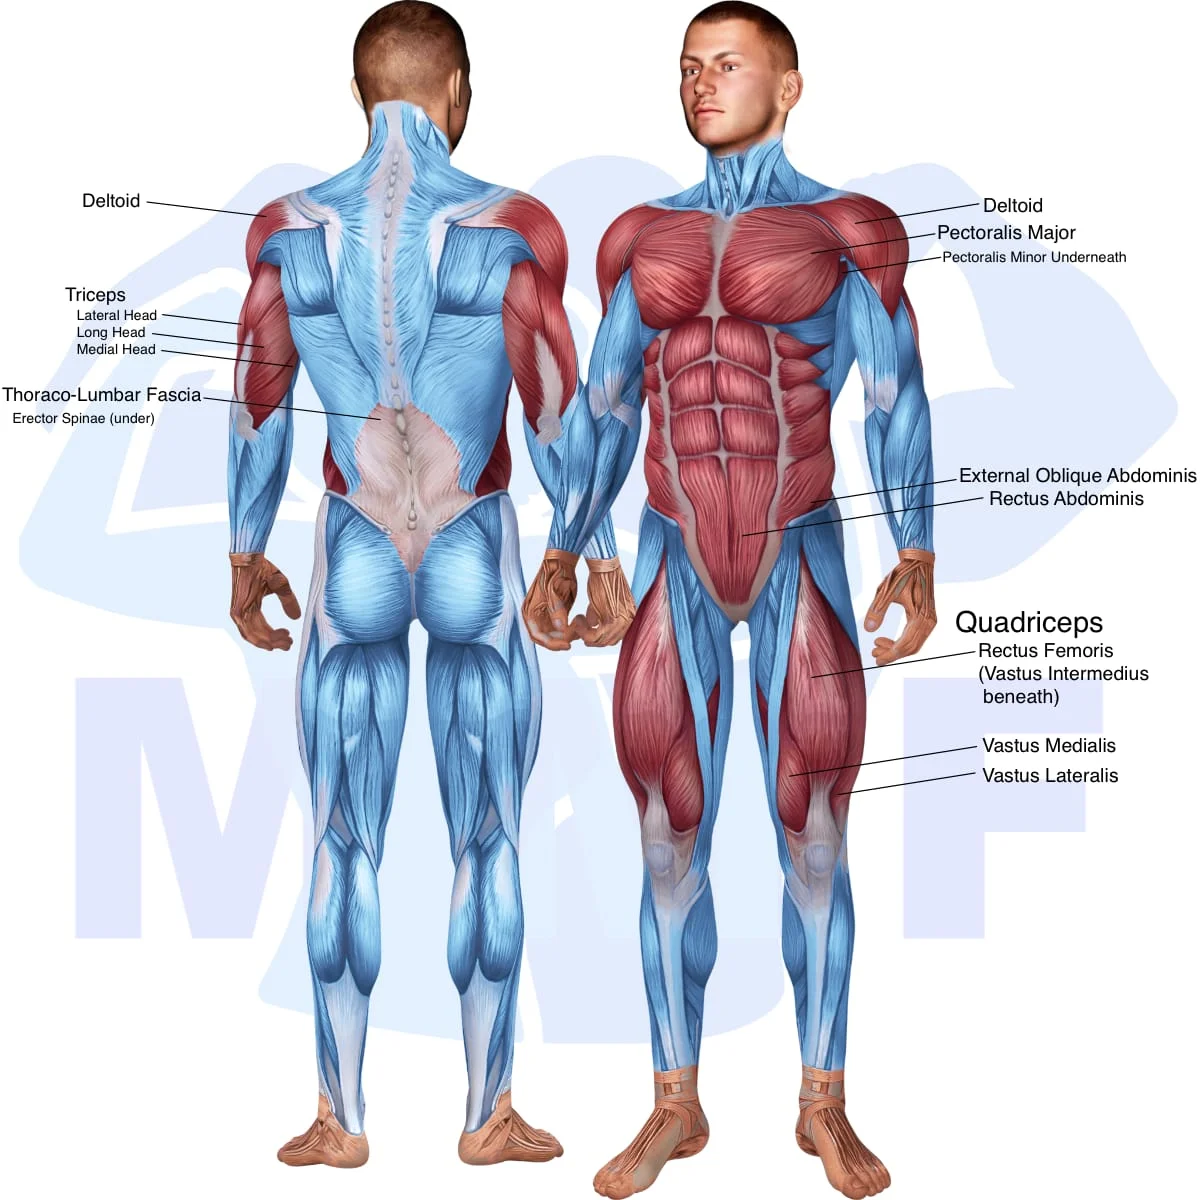 Image of the skeletal muscular system with the muscles used in the decline push up exercise highlighted in red and the rest in blue.